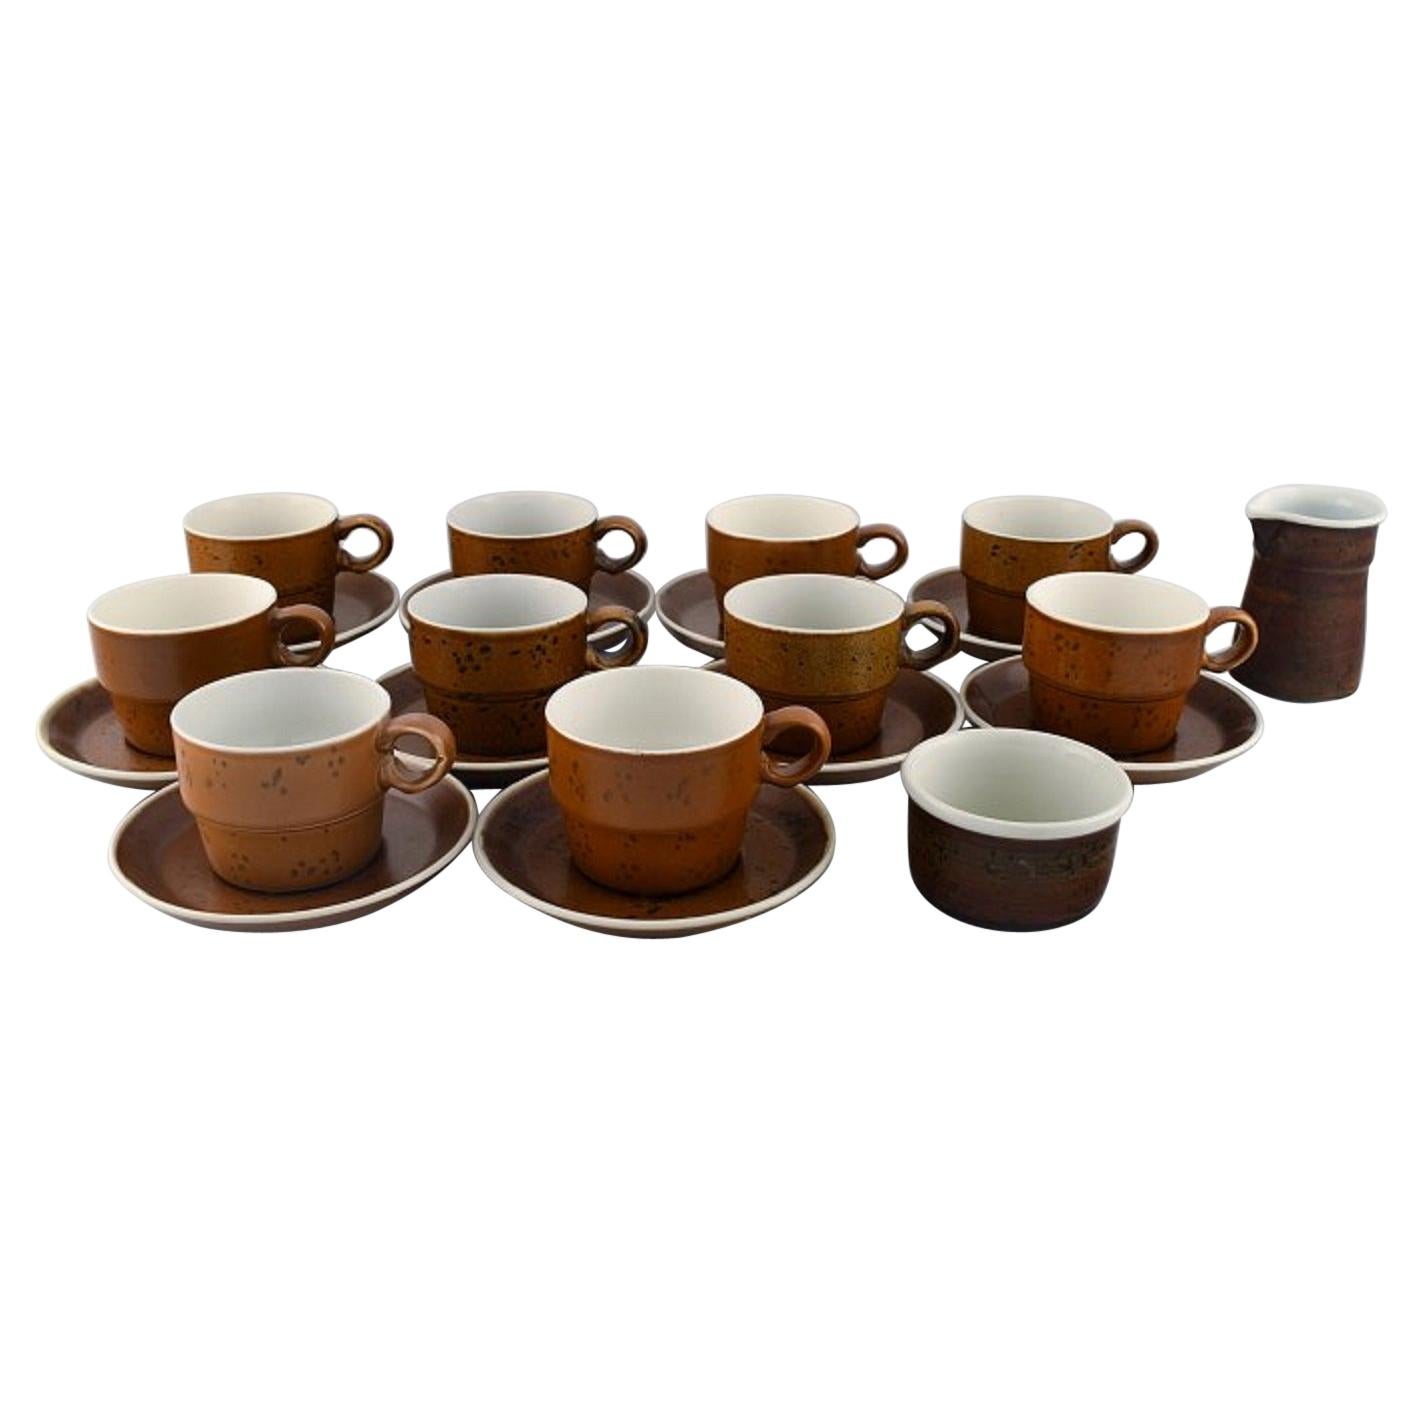 Stig Lindberg for Gustavsberg, Coq Coffee Service for Ten People, 1960's